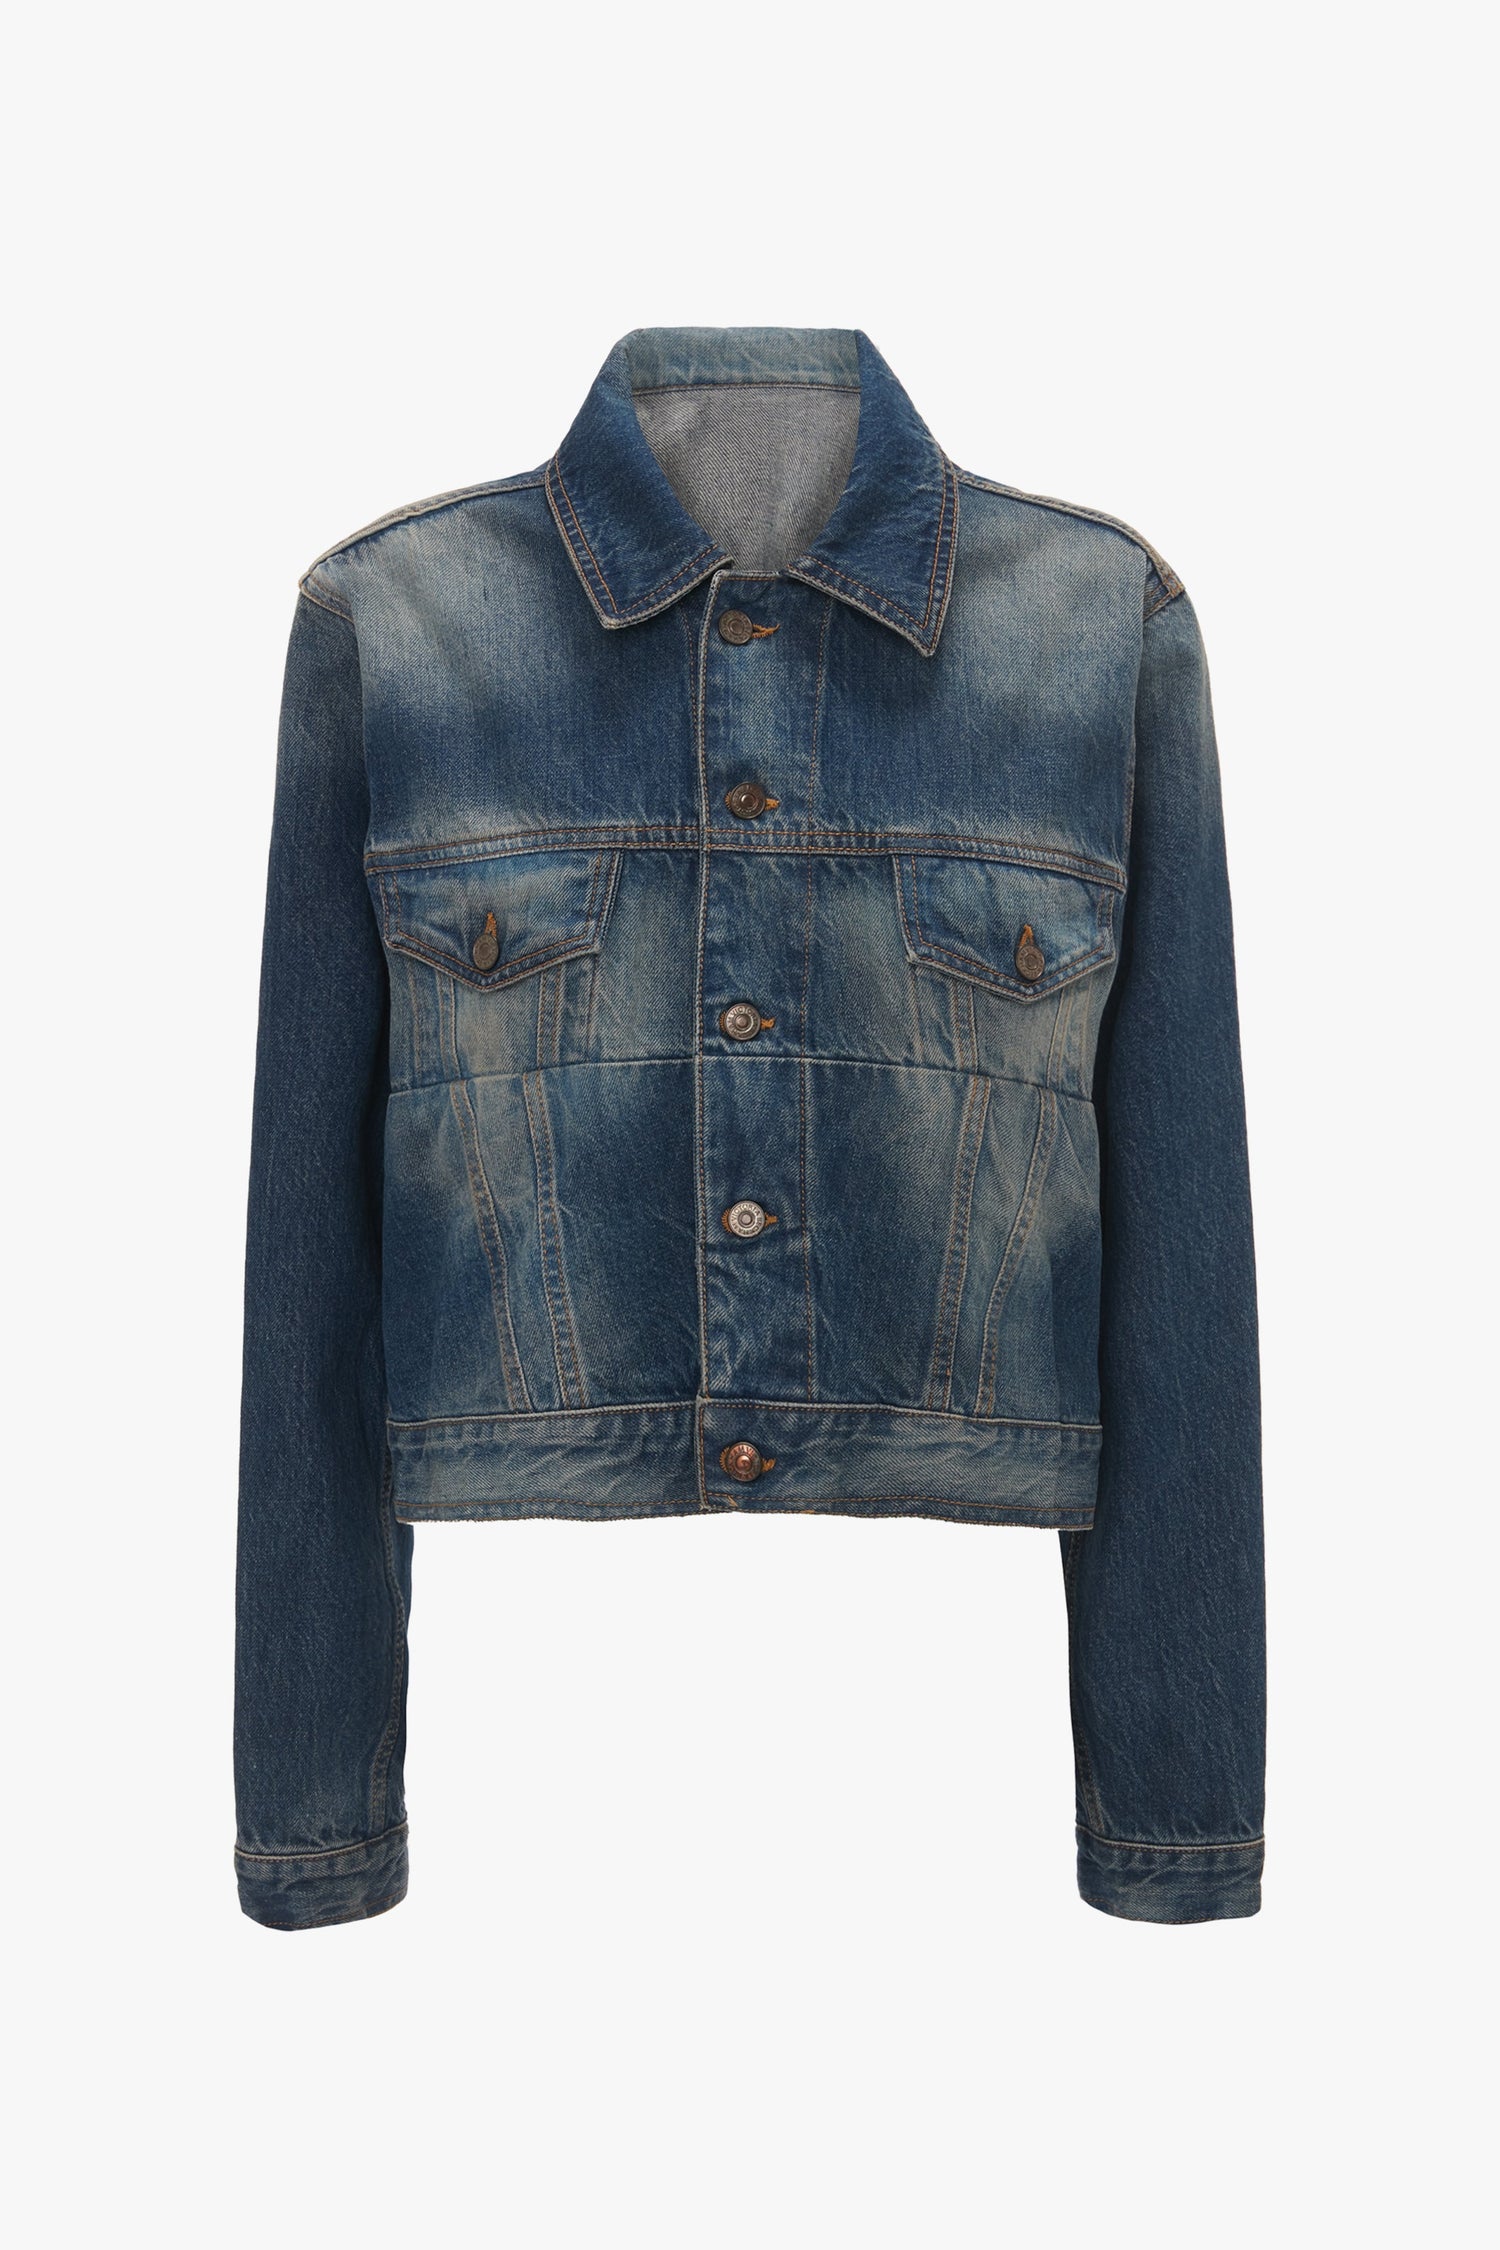 A front view of the Cropped Denim Jacket In Heavy Vintage Indigo Wash with buttons. Designed by Victoria Beckham, this blue denim jacket features long sleeves and two chest pockets.